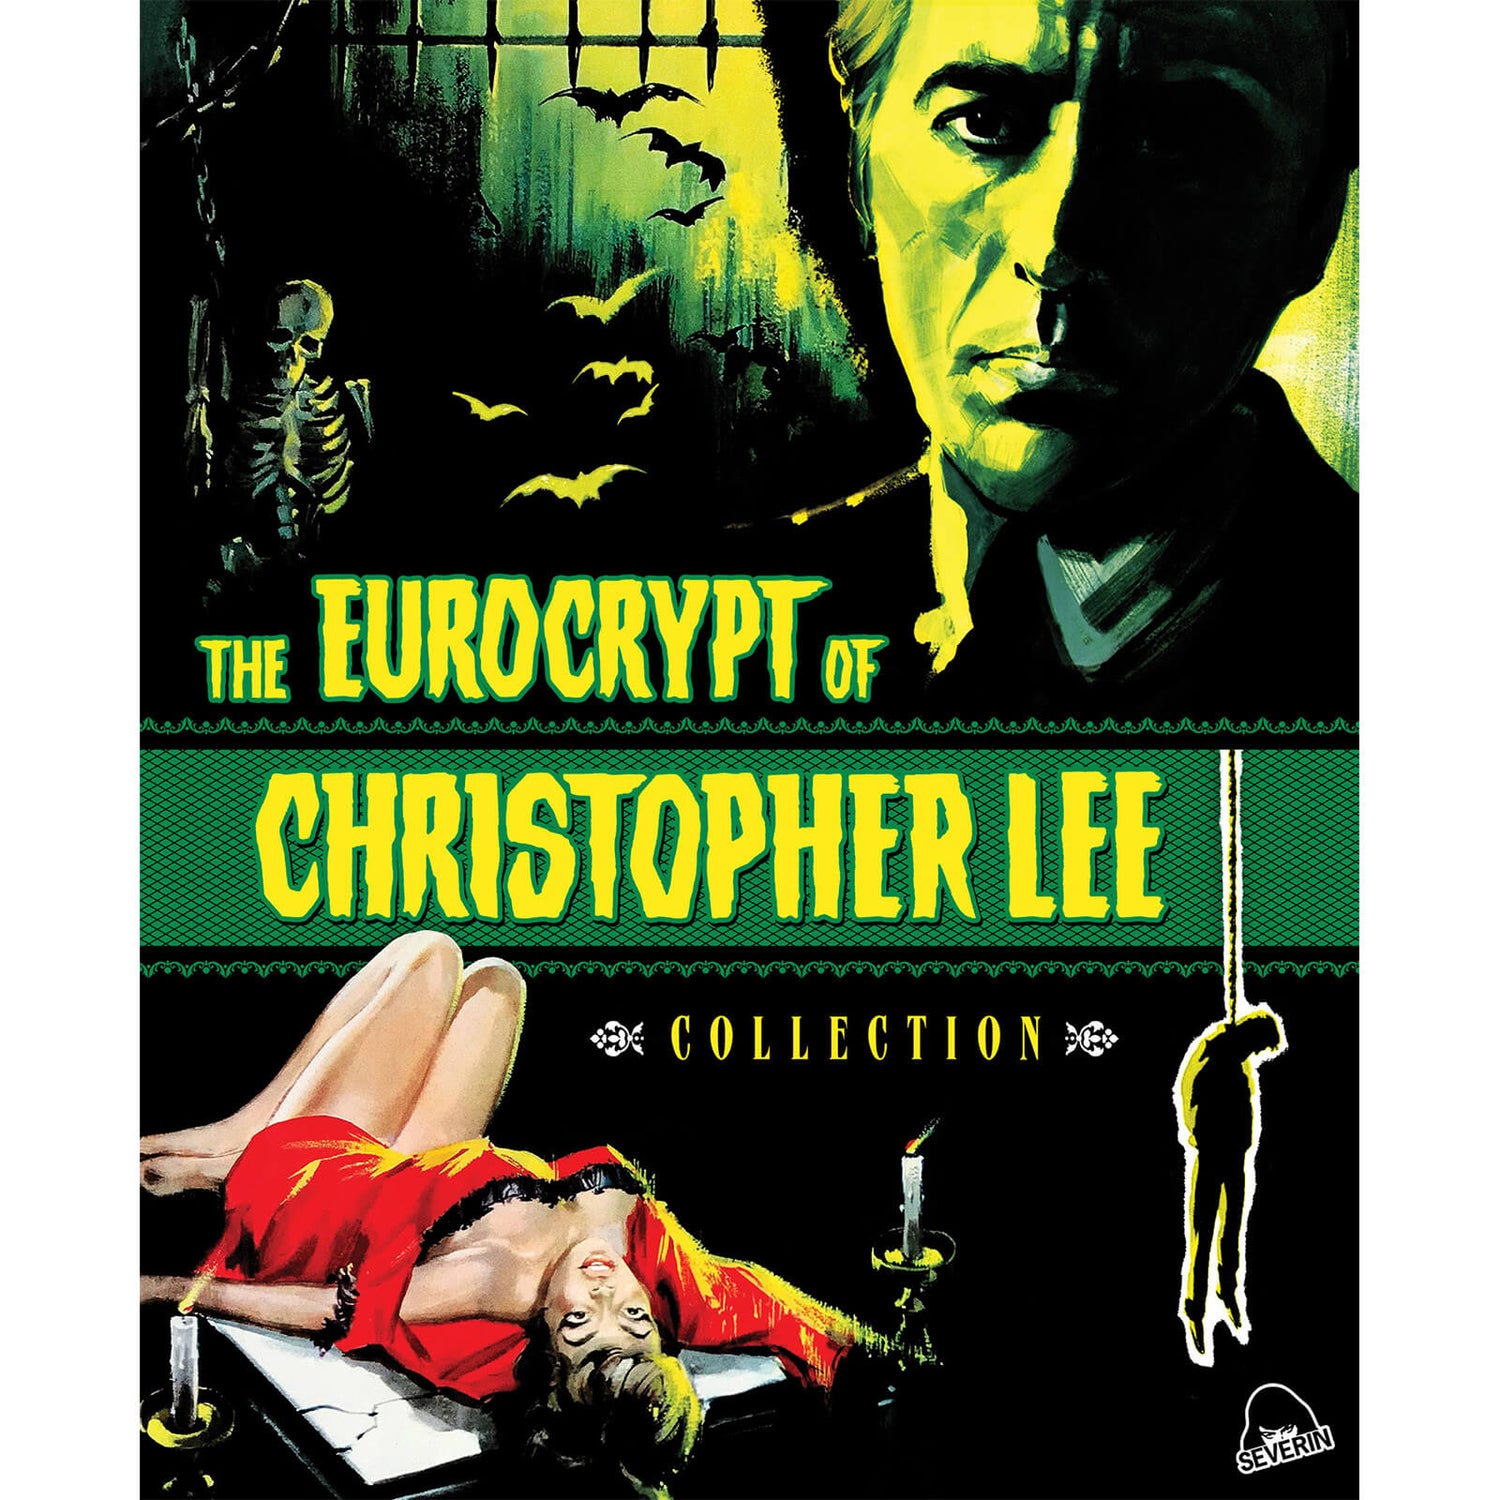 The Eurocrypt Of Christopher Lee Collection (Includes CD)